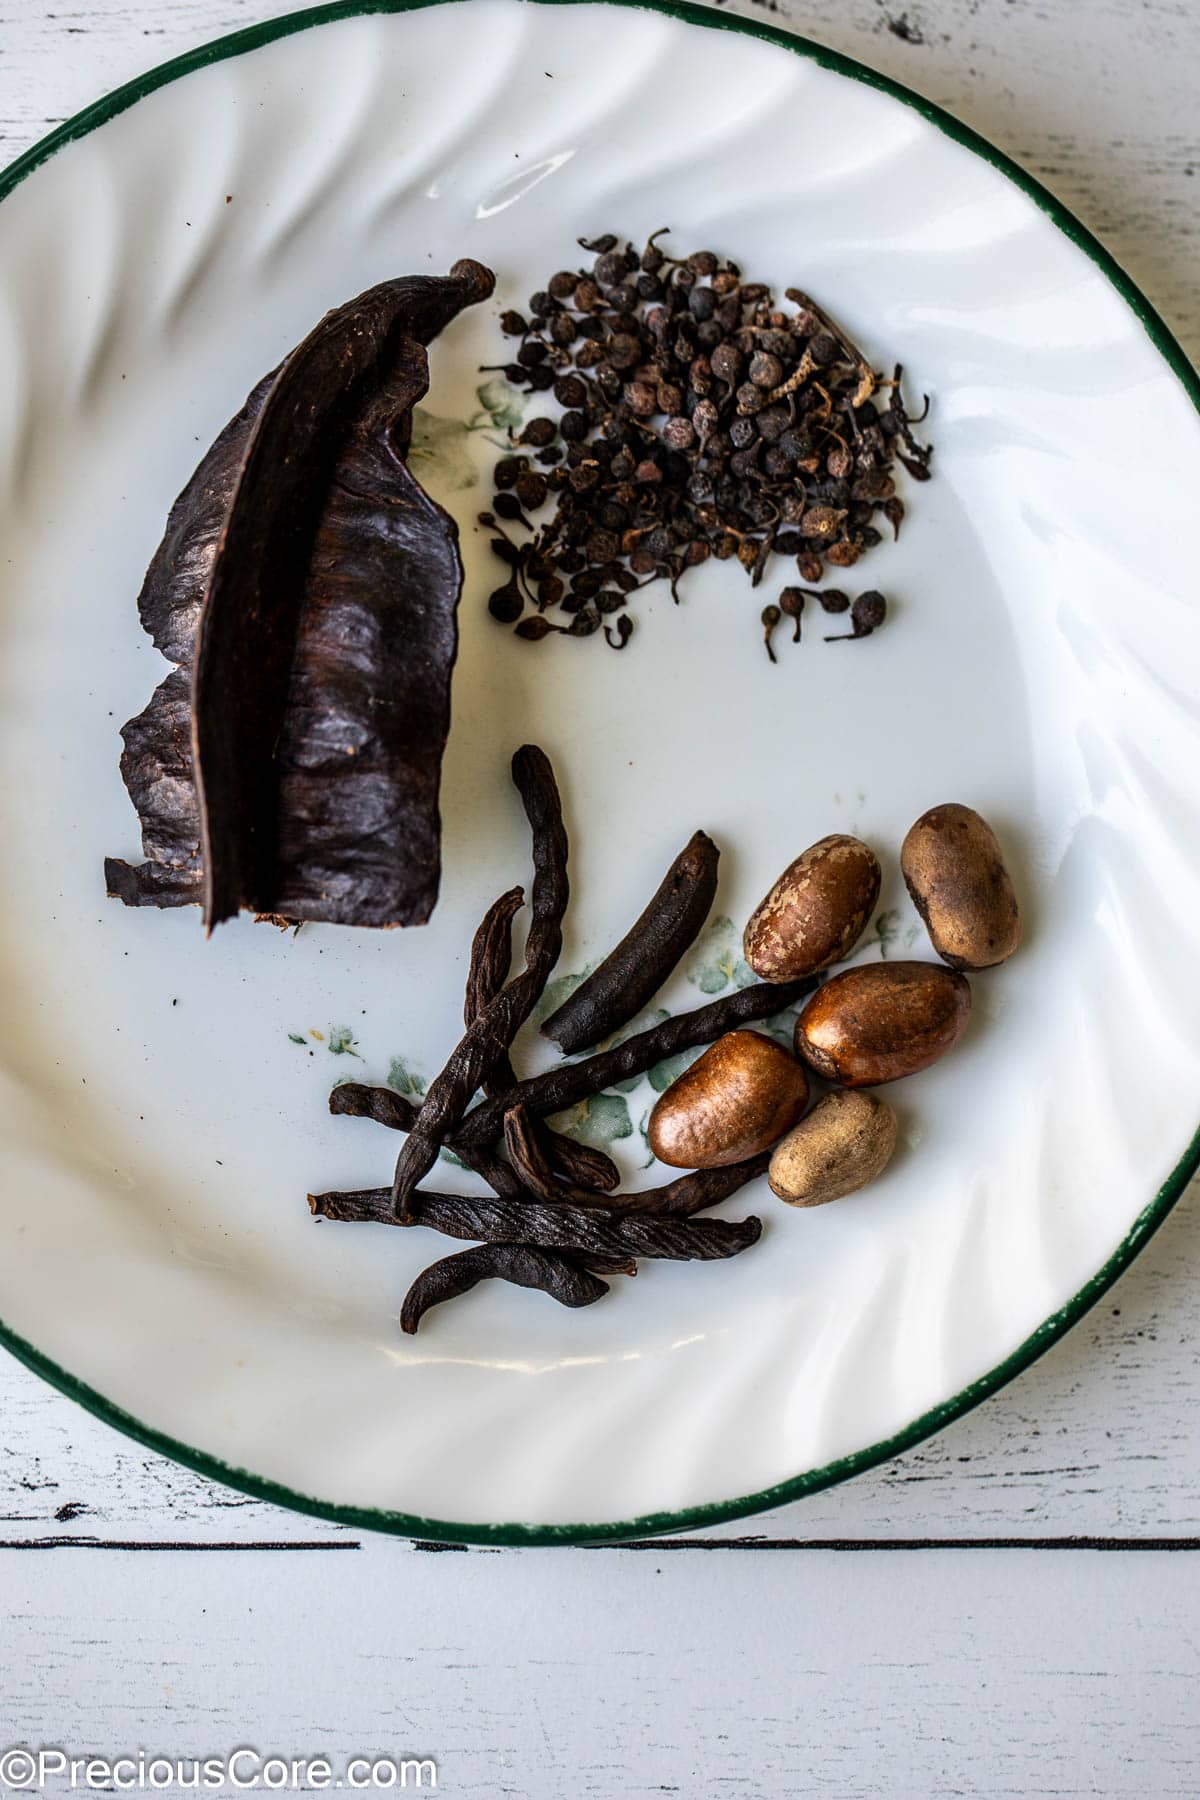 Aidan fruit, African black pepper, negro pepper, and African nutmeg on a white plate.